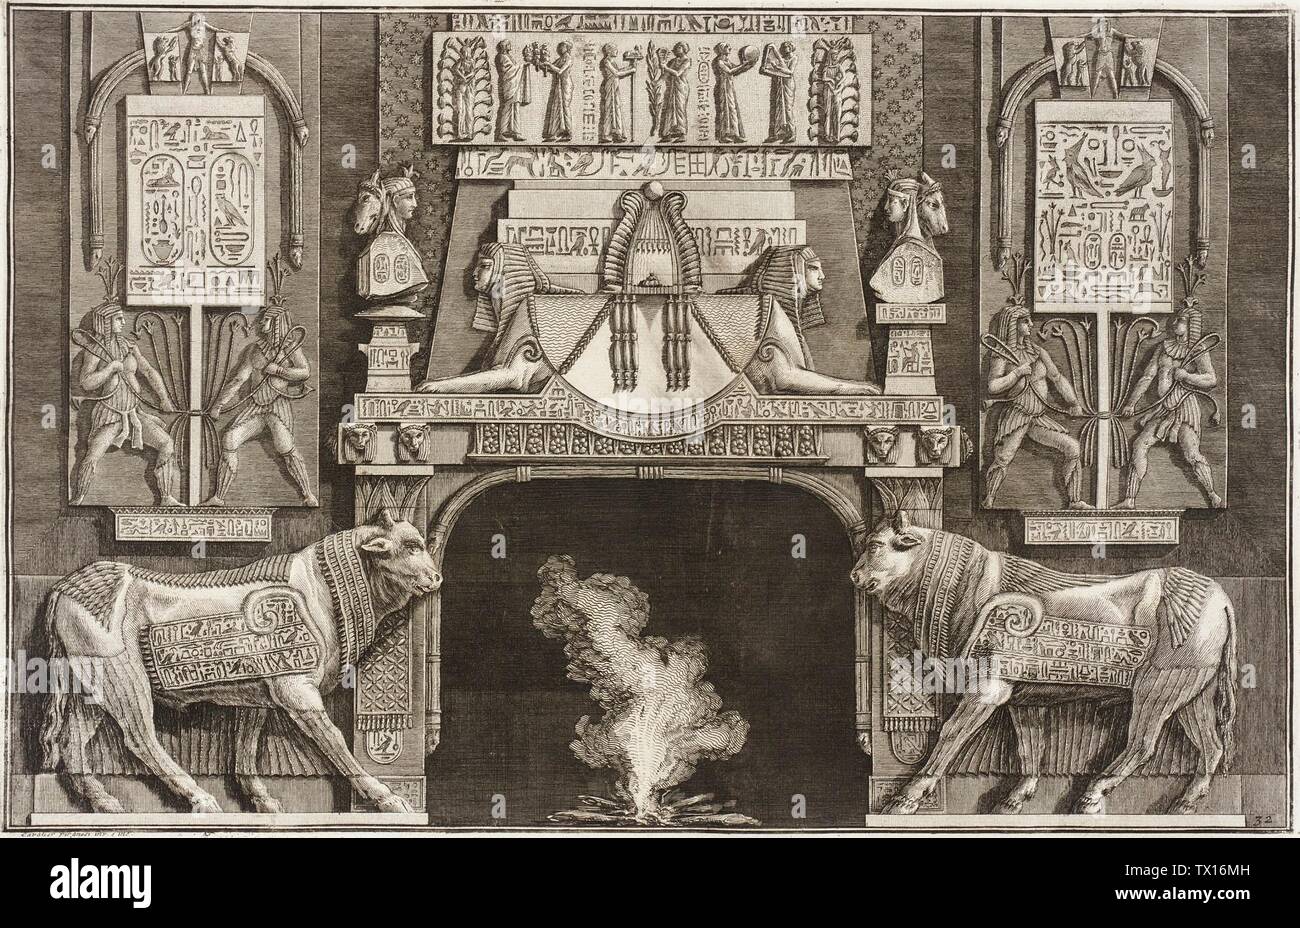 Chimneypiece in the Egyptian style: Lintel with addorsed Sphinxes flanked by bulls in profile.;  Italy, 1769 Series: Diverse Maniere d'adornare i cammini... Prints; engravings Etching Sheet: 16 1/2 x 21 3/4 in. (41.91 x 55.24 cm); plate: 15 1/2 x 9 7/8 in. (39.37 x 25.08 cm) Purchased with funds raised through the International Fine Art Print Dealers Fair (AC1999.142.2) Prints and Drawings; 1769date QS:P571,+1769-00-00T00:00:00Z/9; Stock Photo